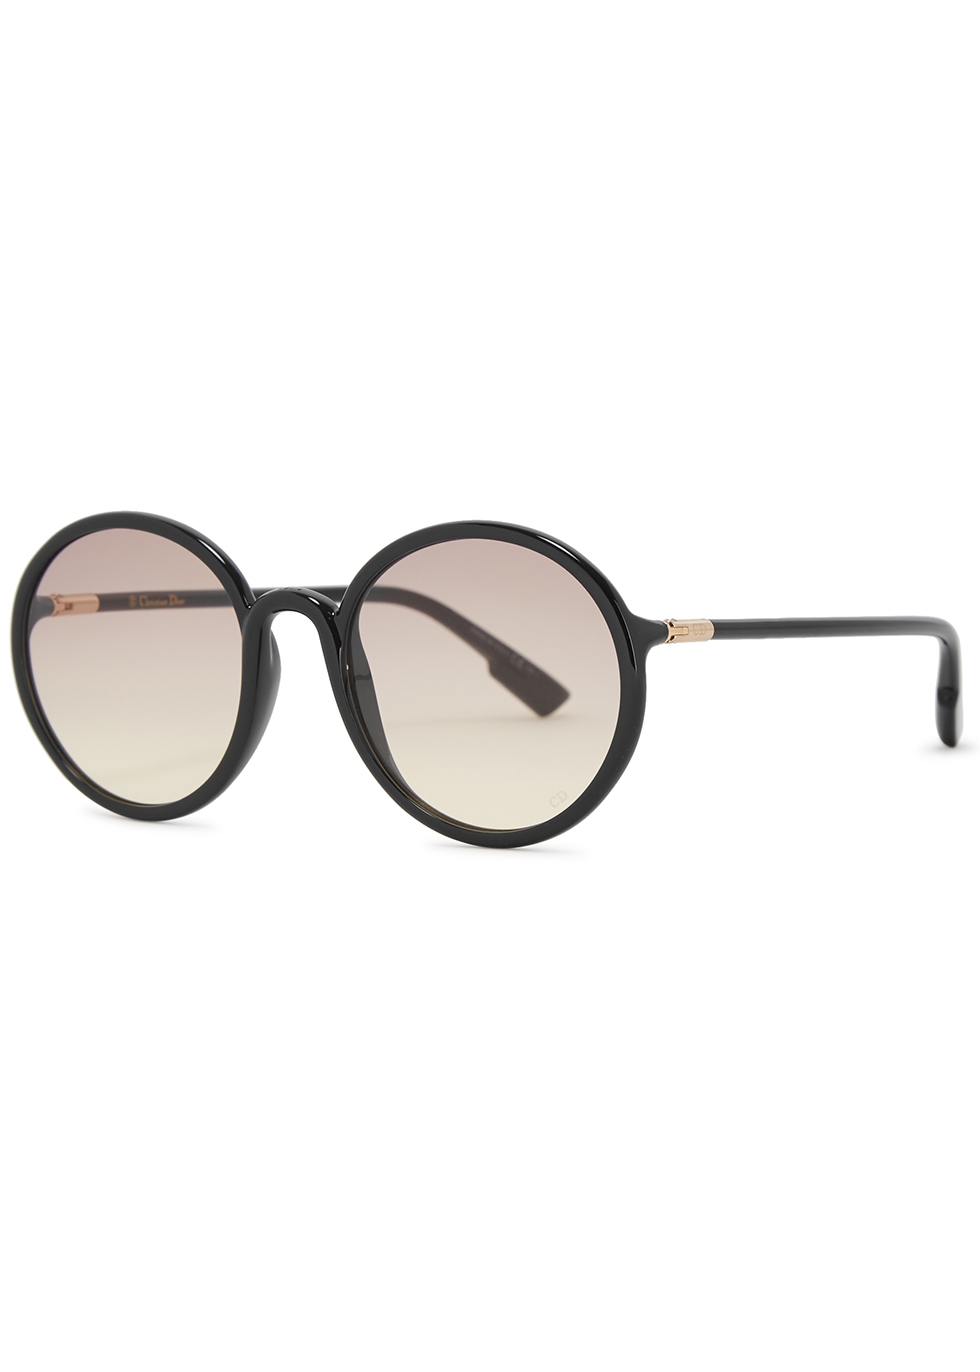 round frame spectacles